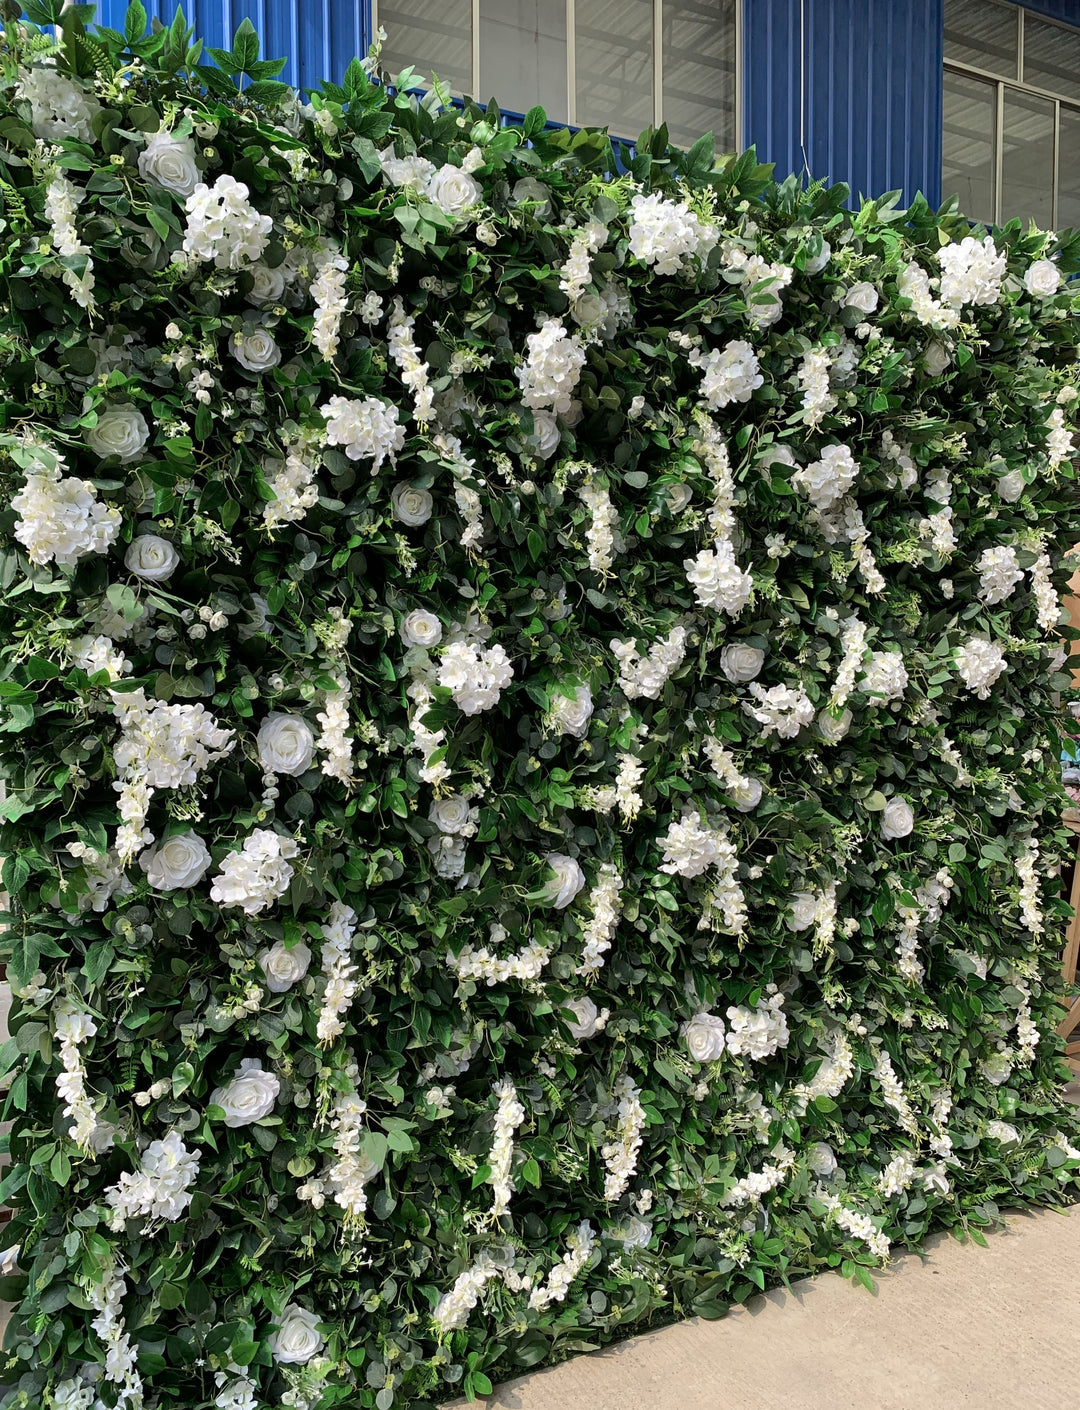 White Roses And Hydrangeas With Green Leaves, Artificial Flower Wall Backdrop